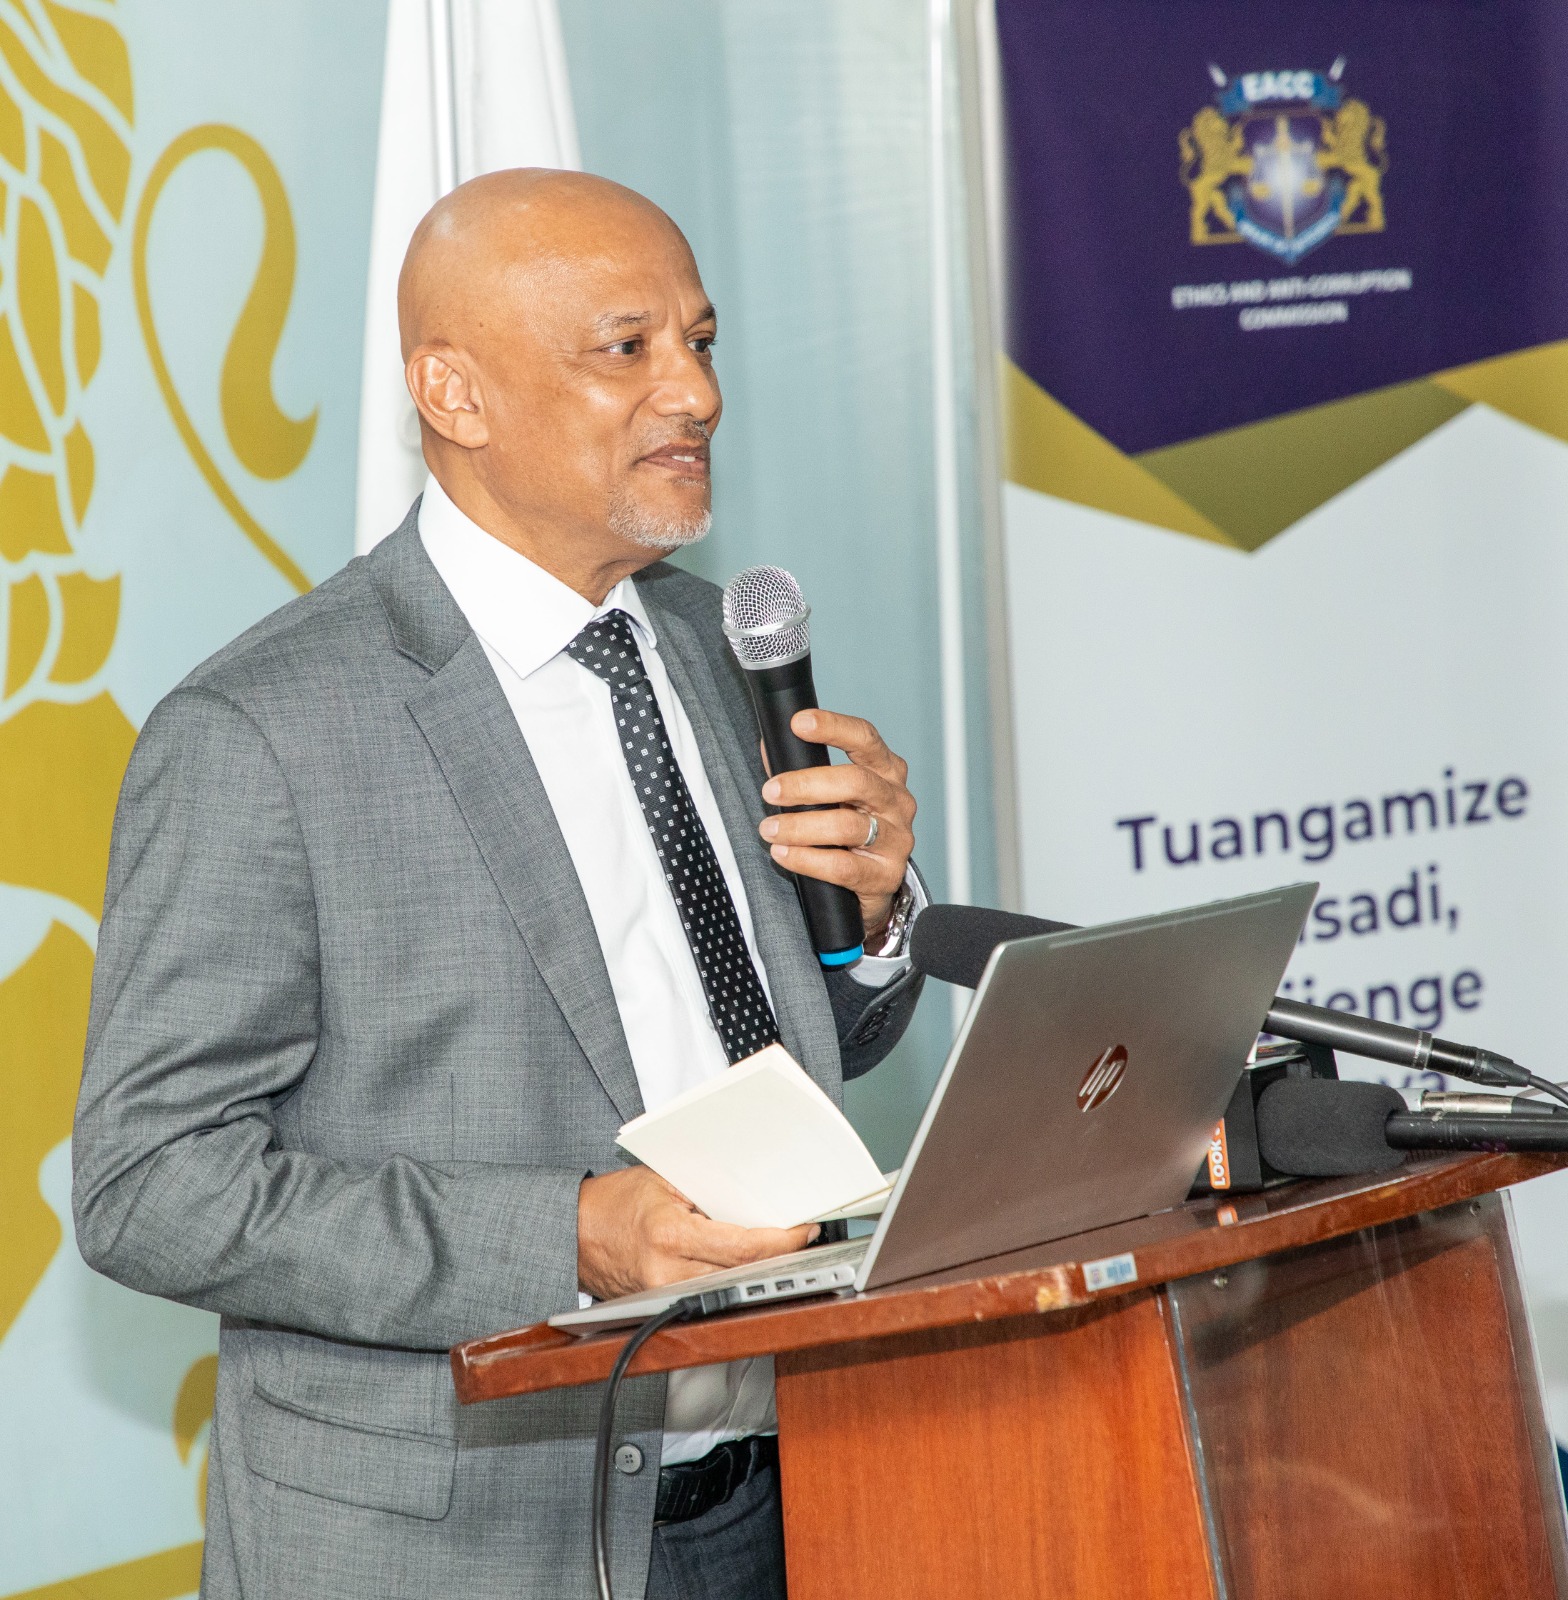 EACC records significant progress in asset recovery